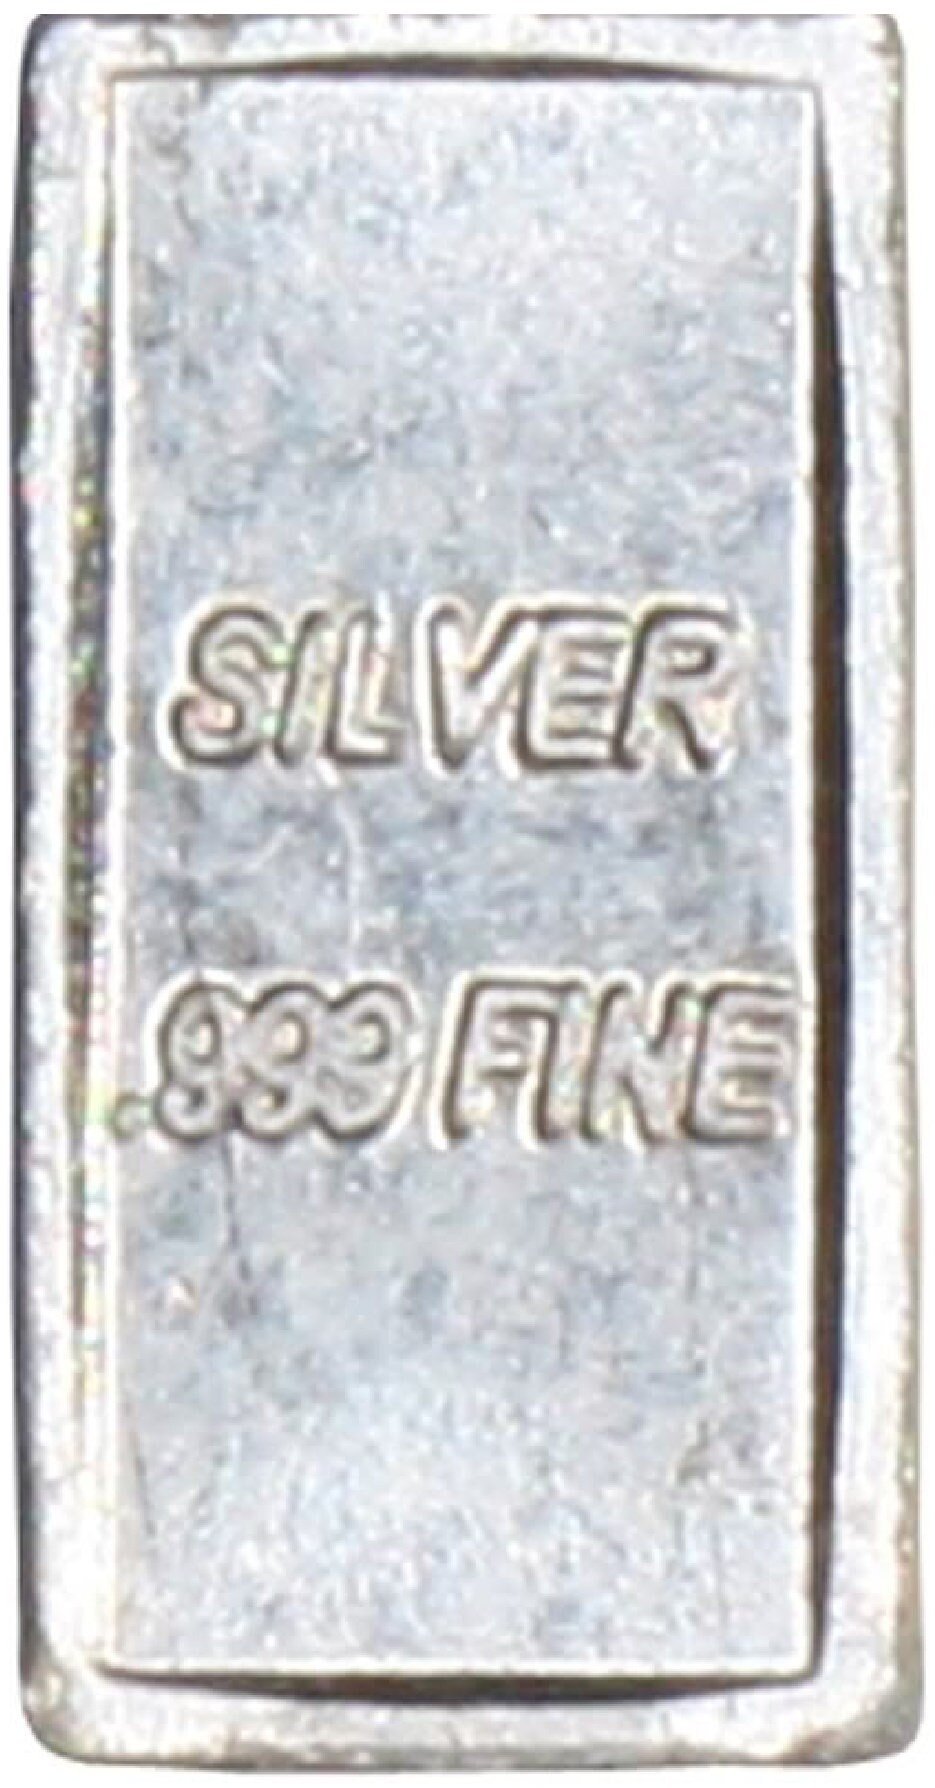 5 GN SOLID SILVER .999 Fine Bullion bars precious metals grain grams ounces Troy Collection Round Investors Handcrafted Mint